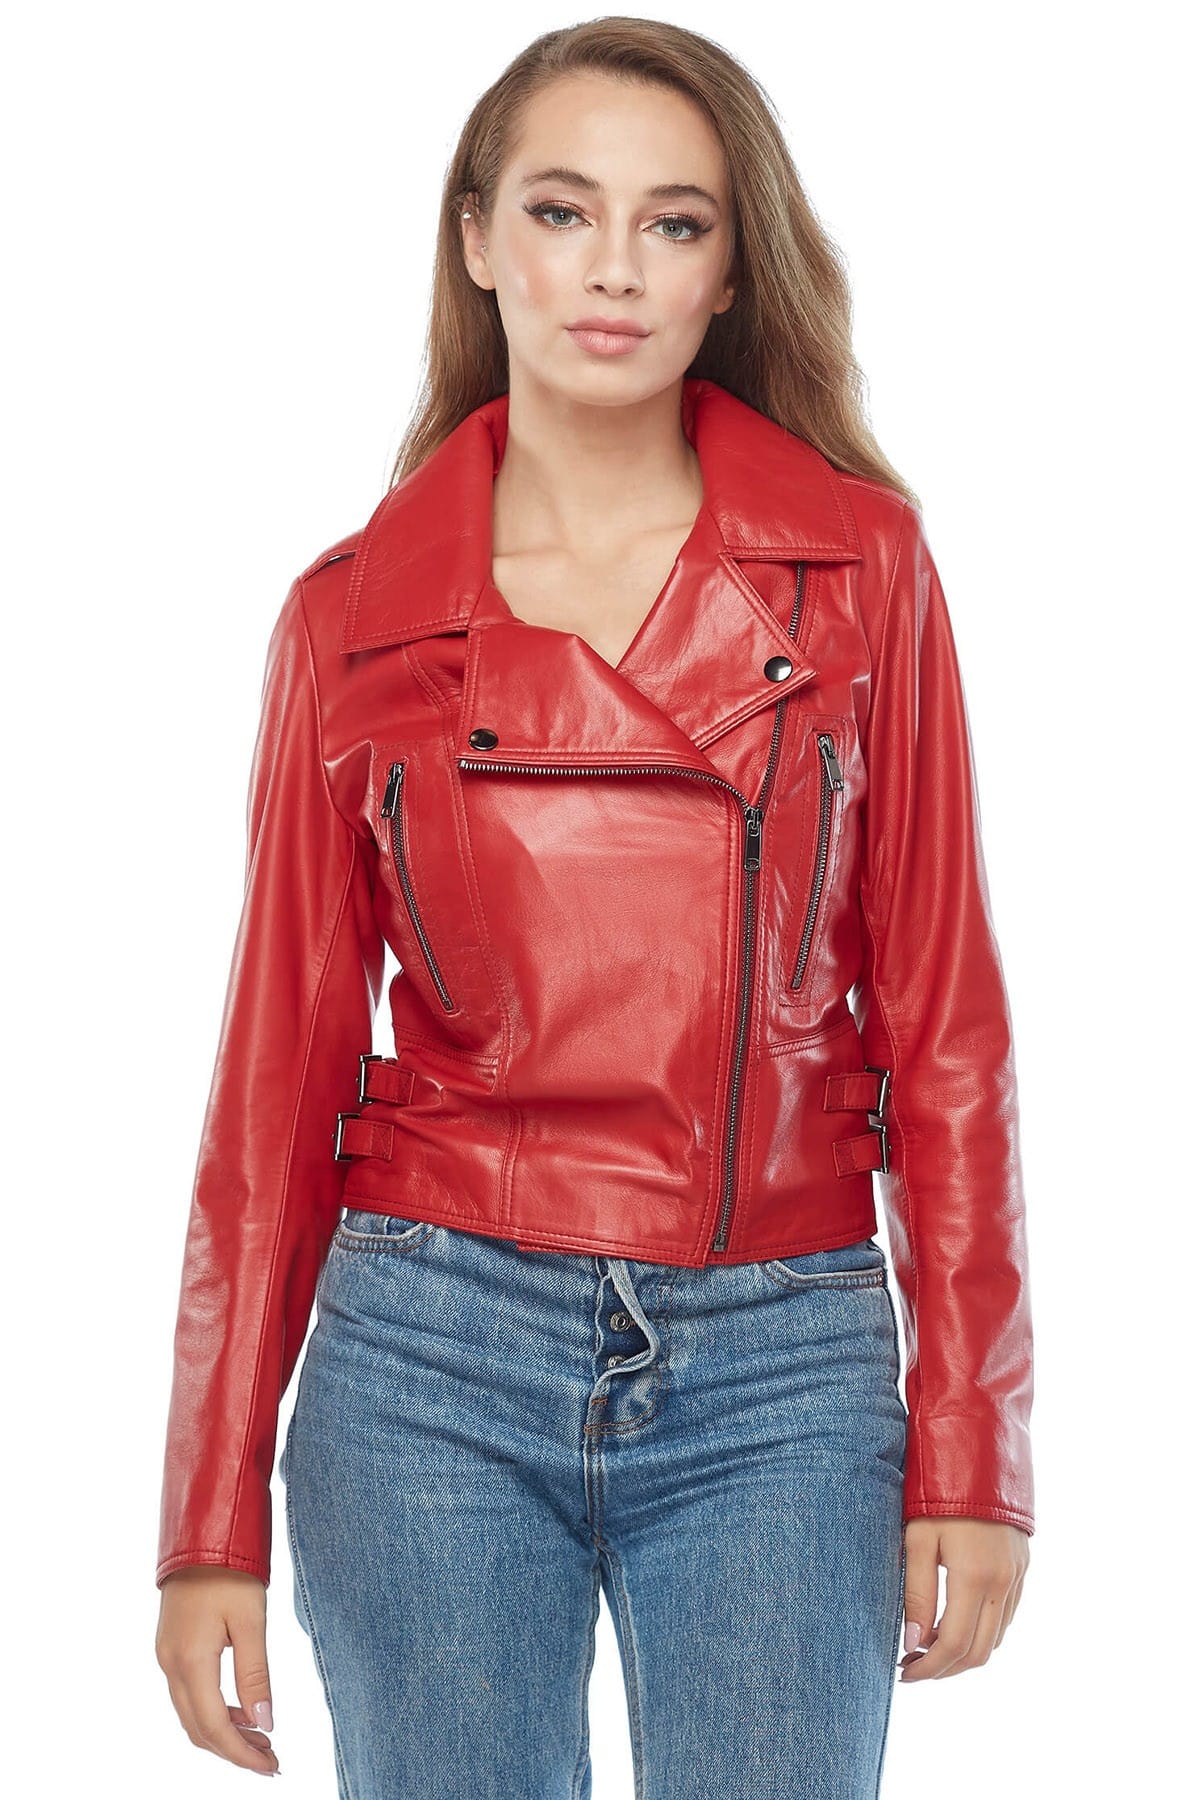 Chloe Ayling Women's 100 % Real Red Leather Moto Jacket